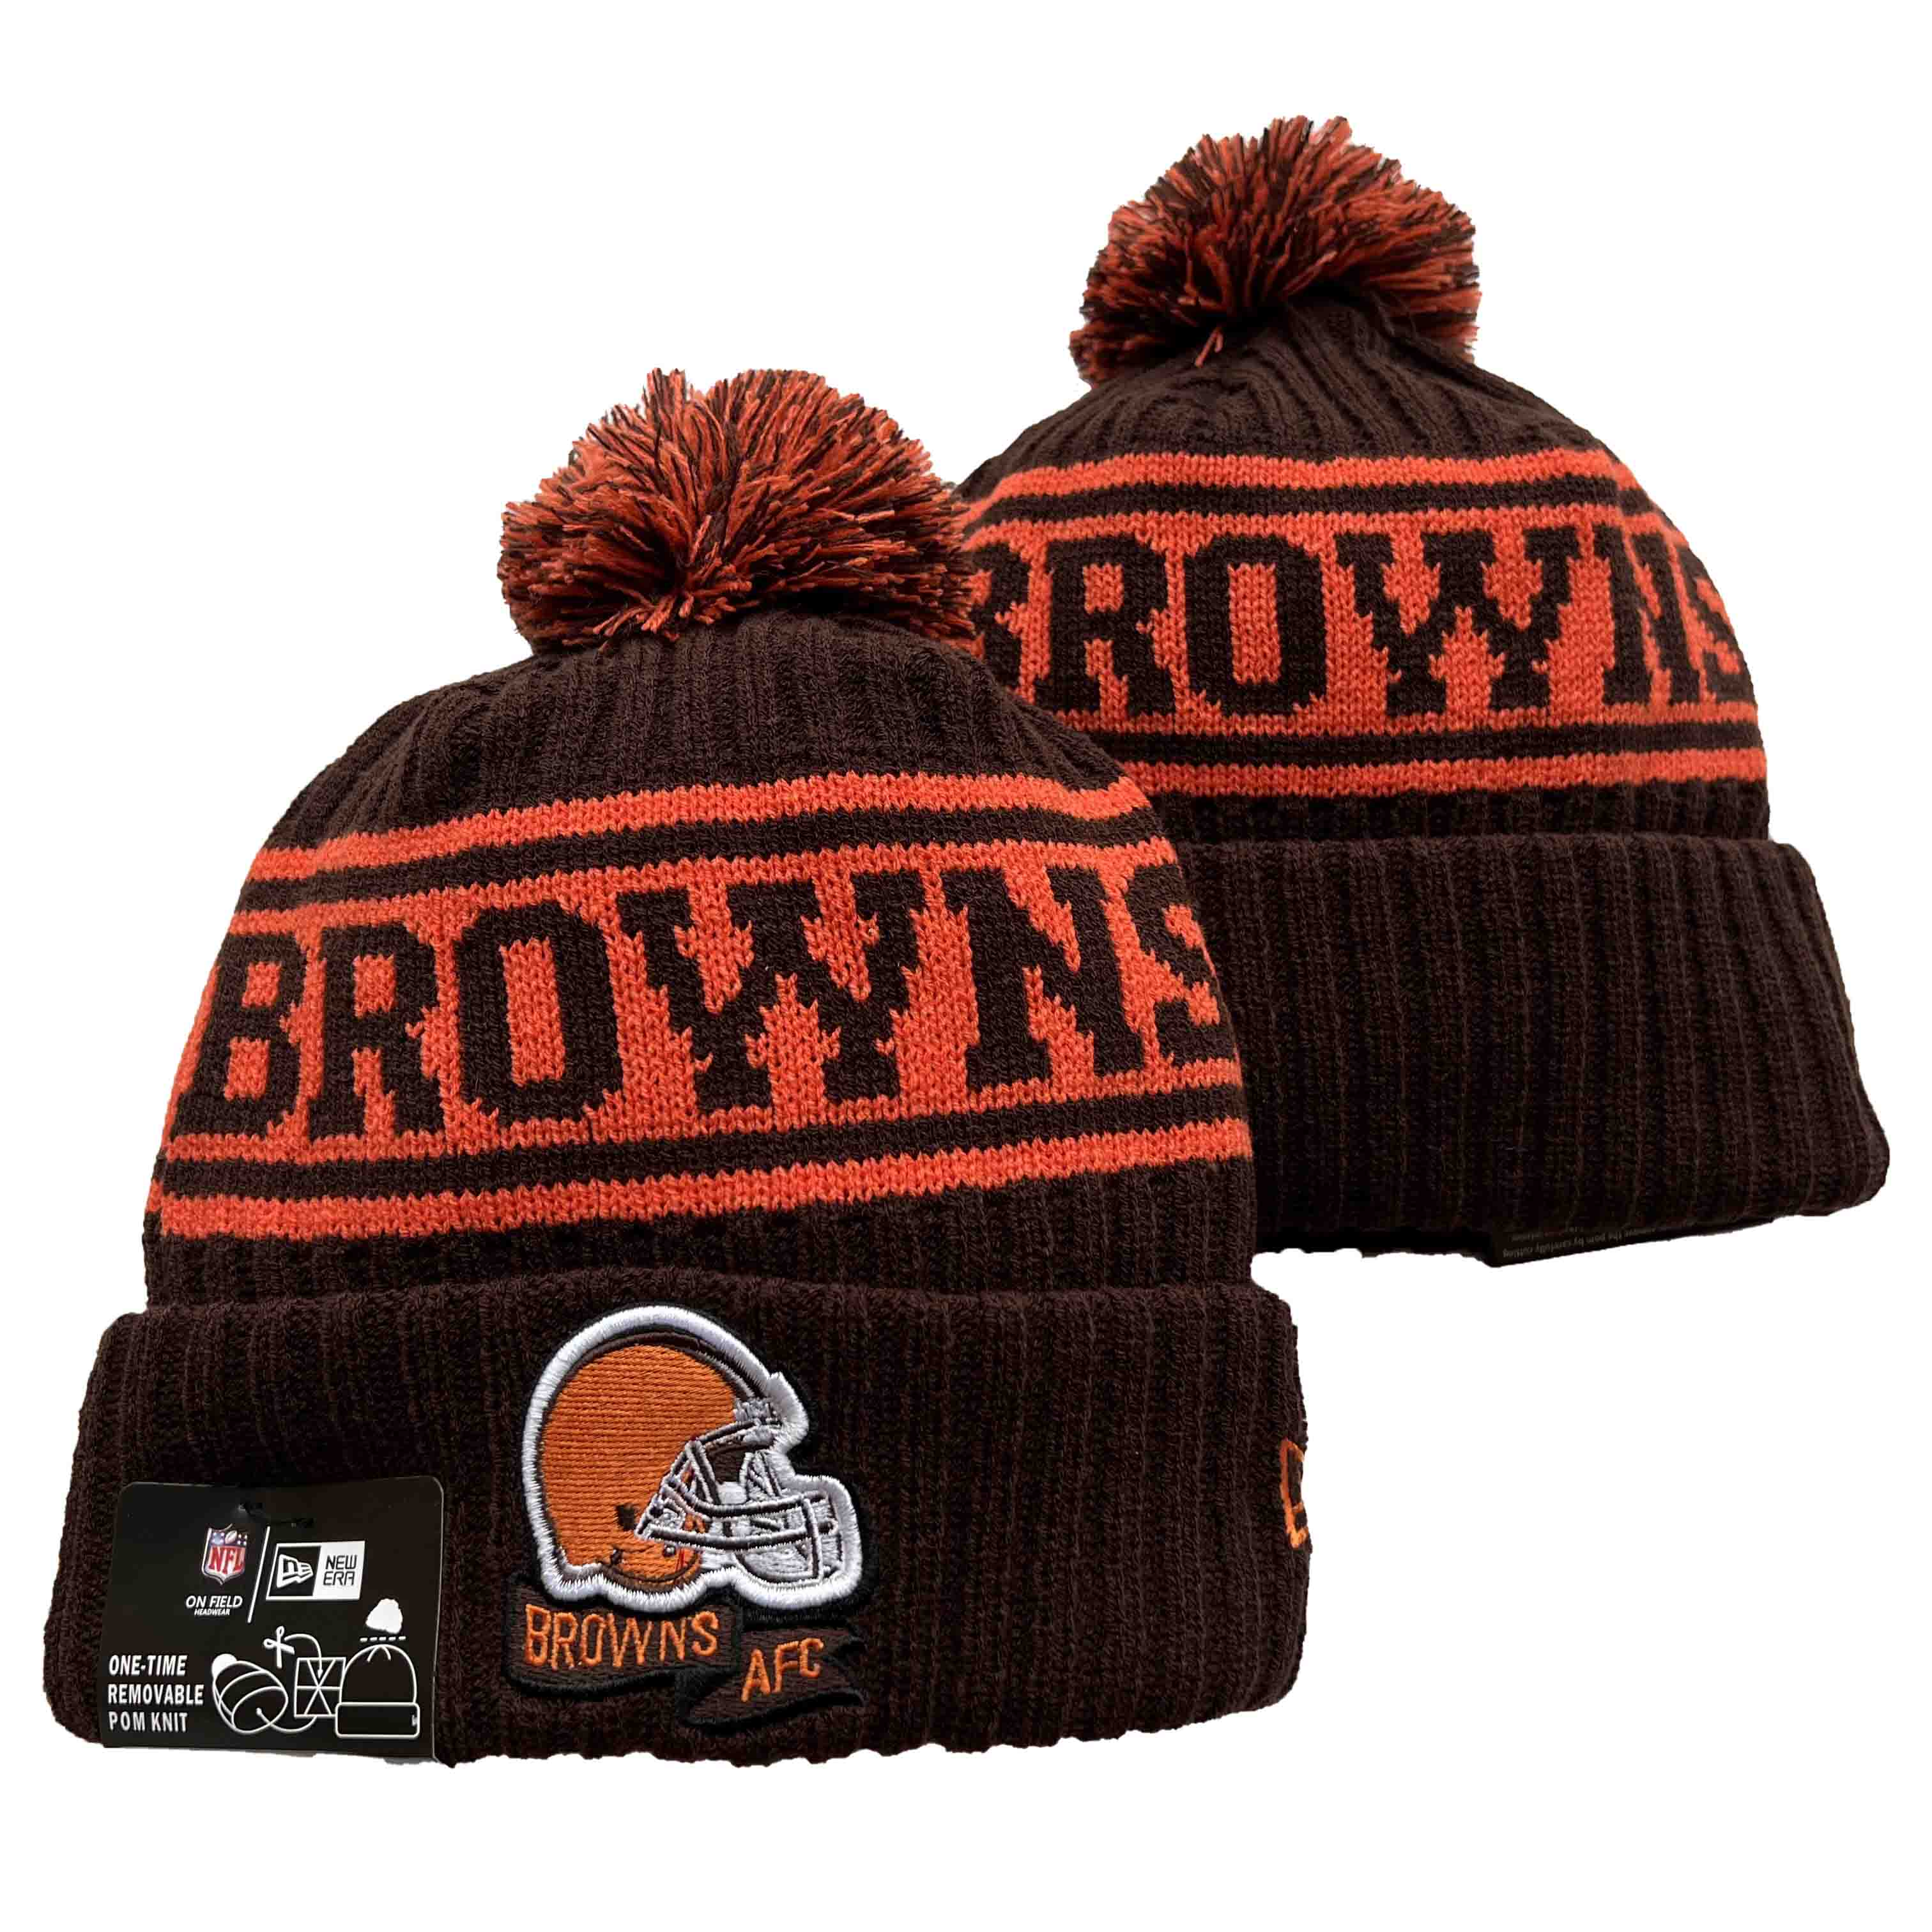 NFL Cleveland Browns Beanies Knit Hats-YD1302